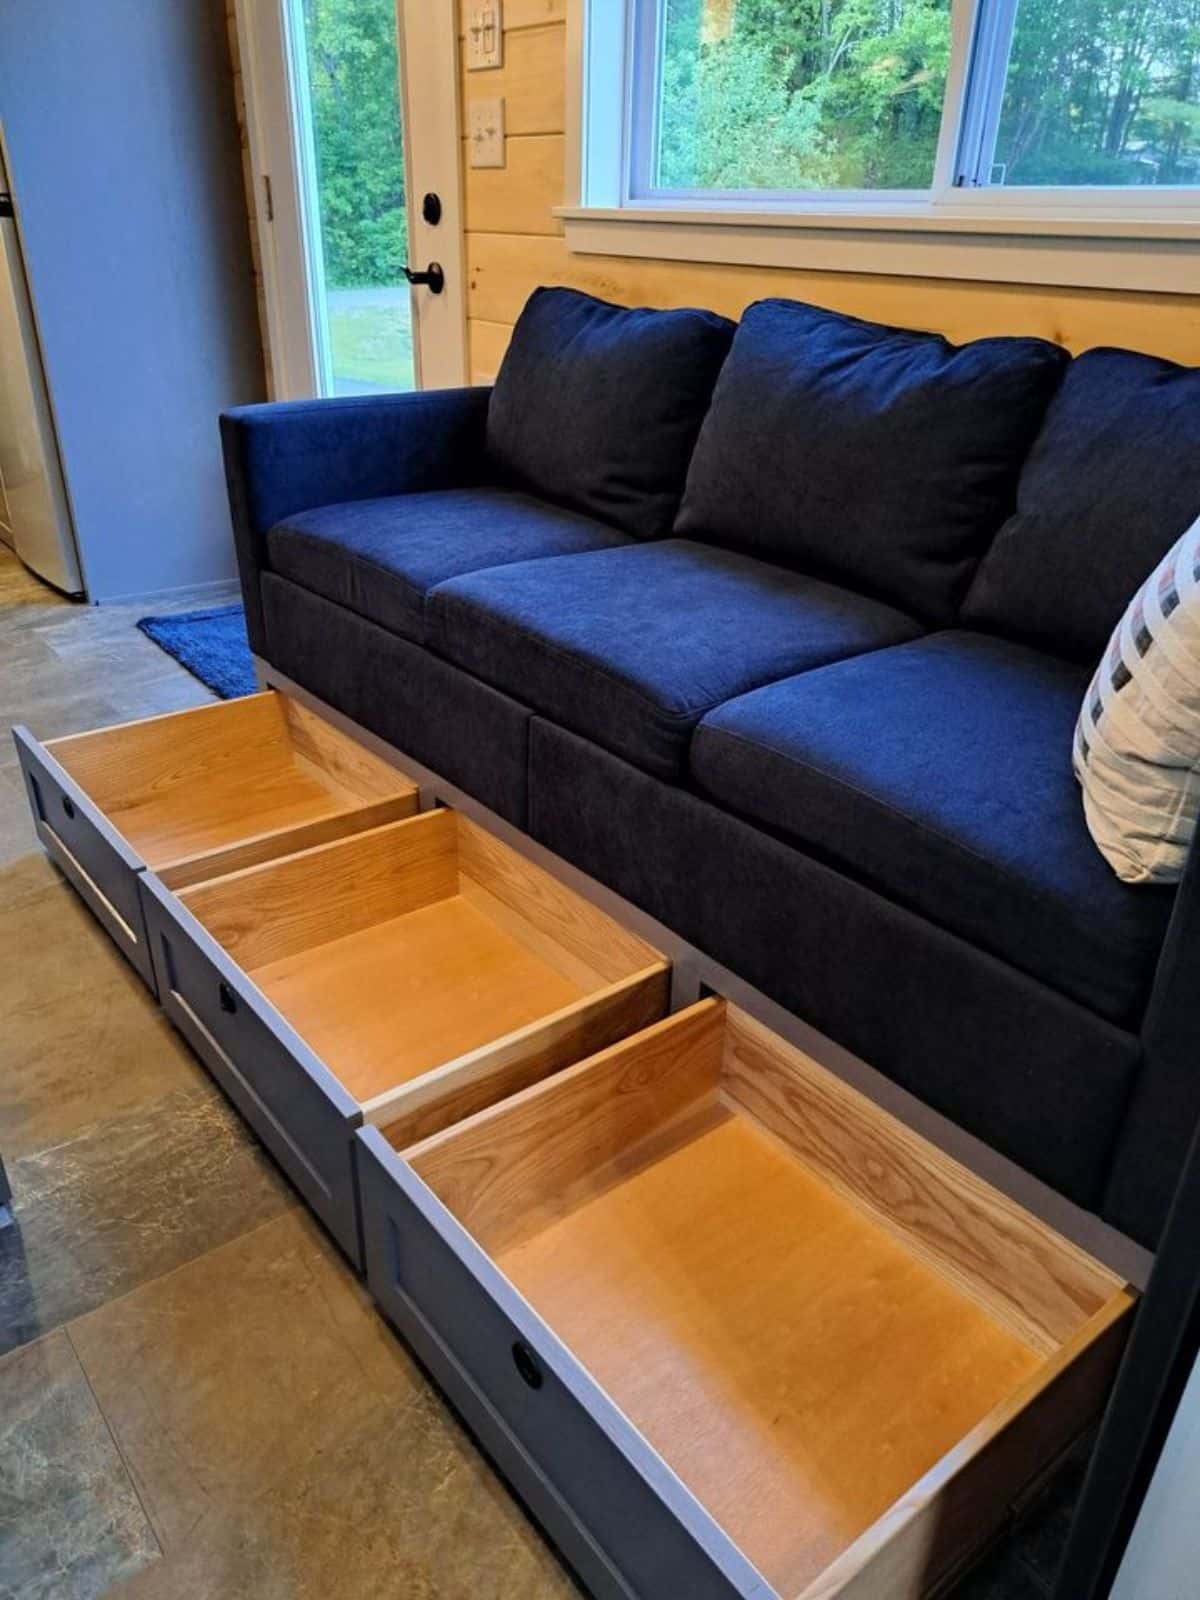 couch in living area has a storage underneath